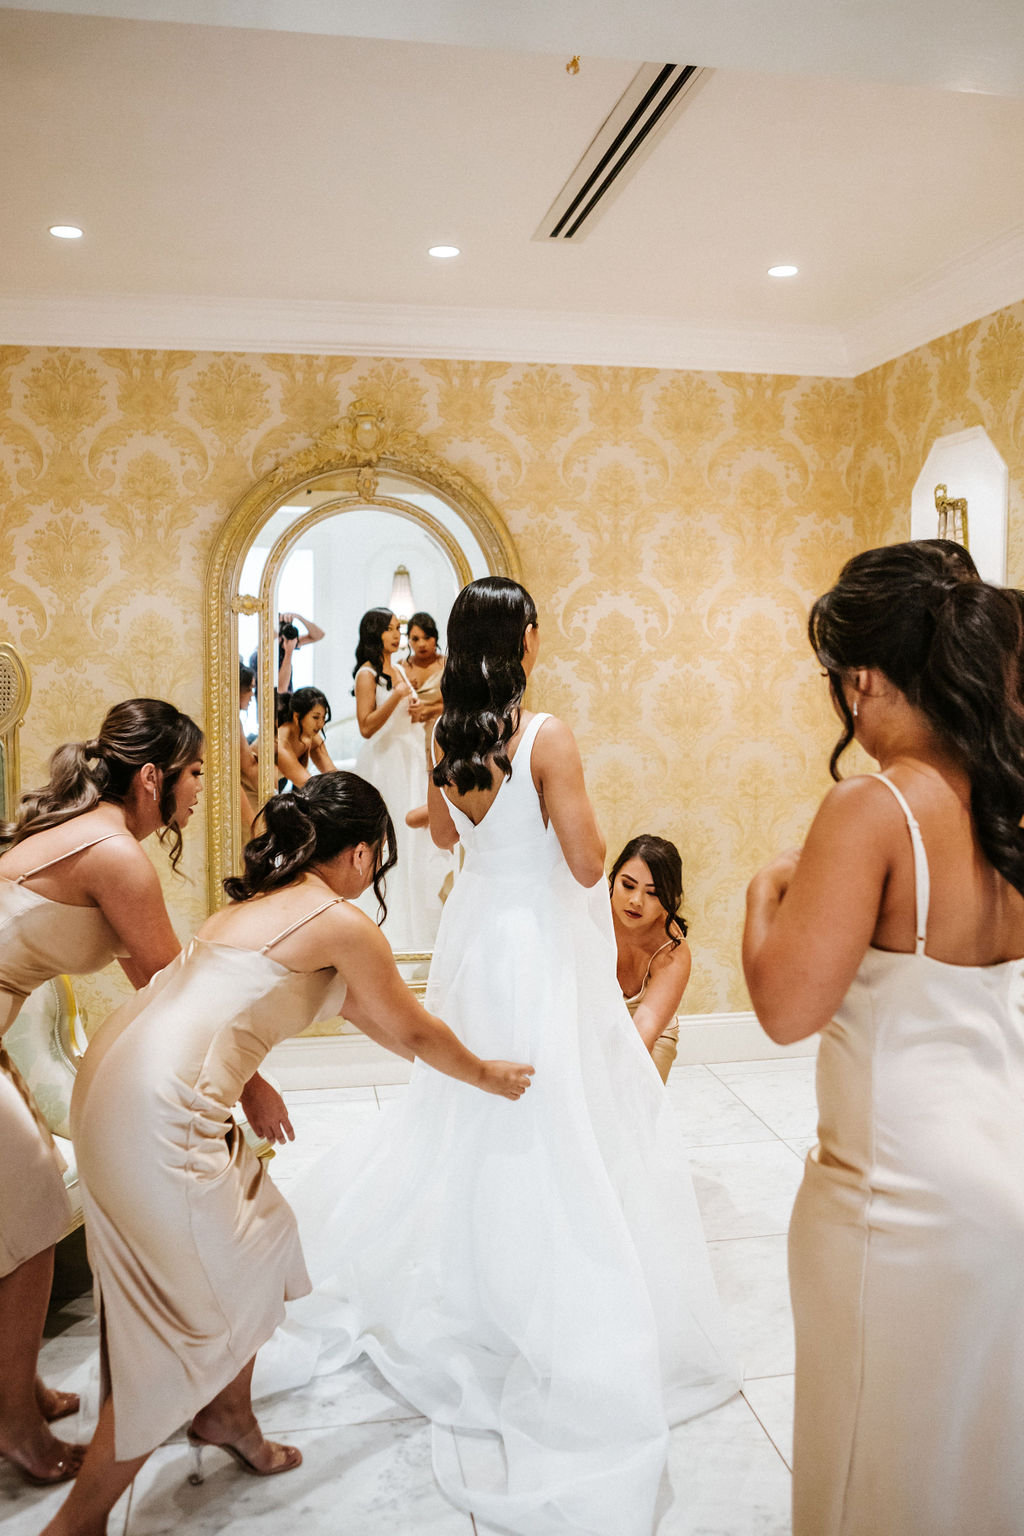 KWH bride Win getting ready with bridesmaids for tropical wedding, wearing the Aisha gown by Karen Willis Holmes.